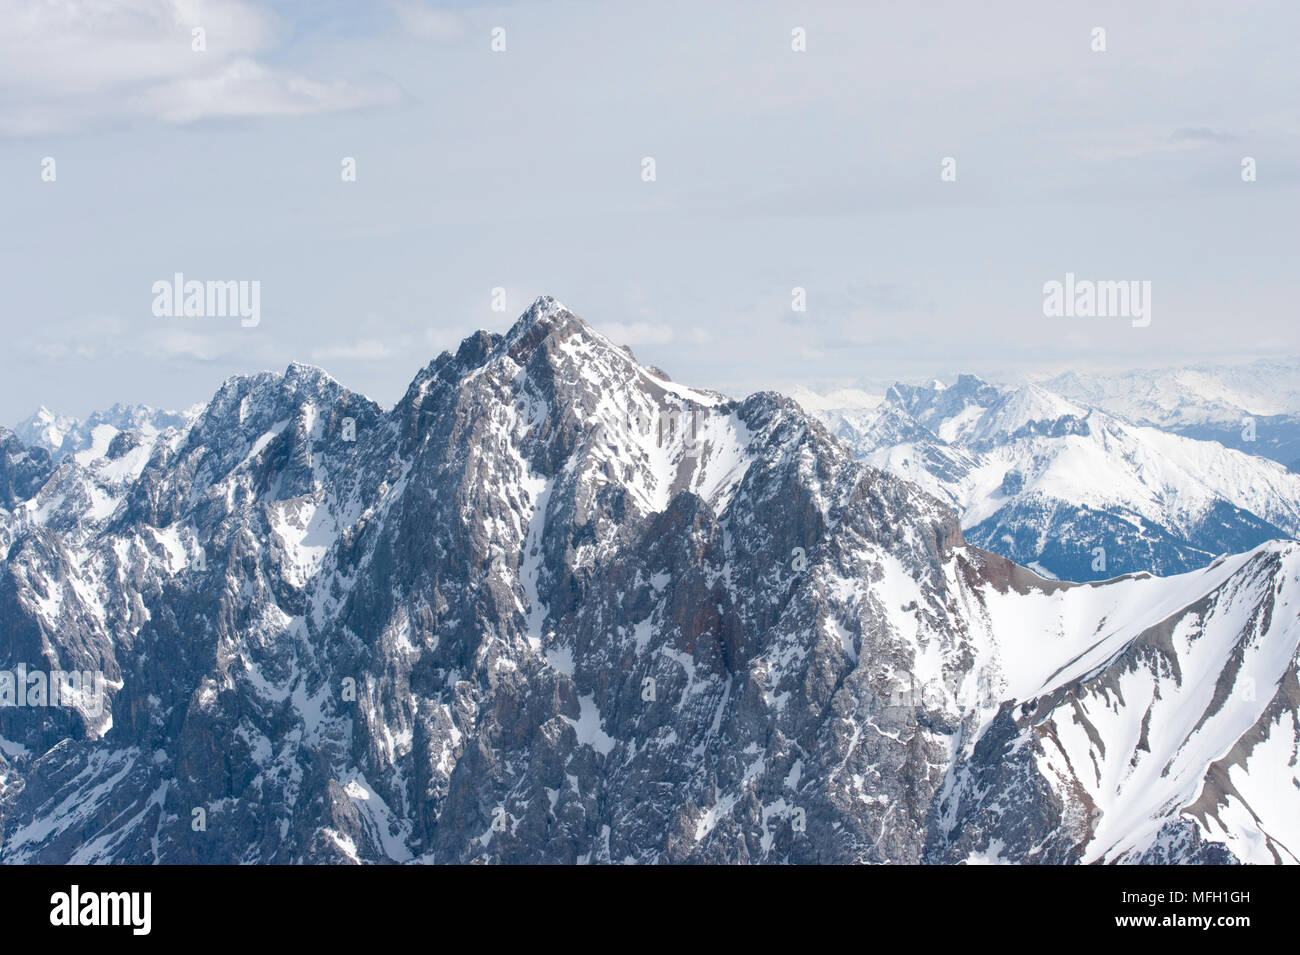 Alps mountain range viewed from Zugspitze, in Eastern Alps, which form part of the Wetterstein mountains,(German: Wettersteingebirge), Bavaria,Germany Stock Photo